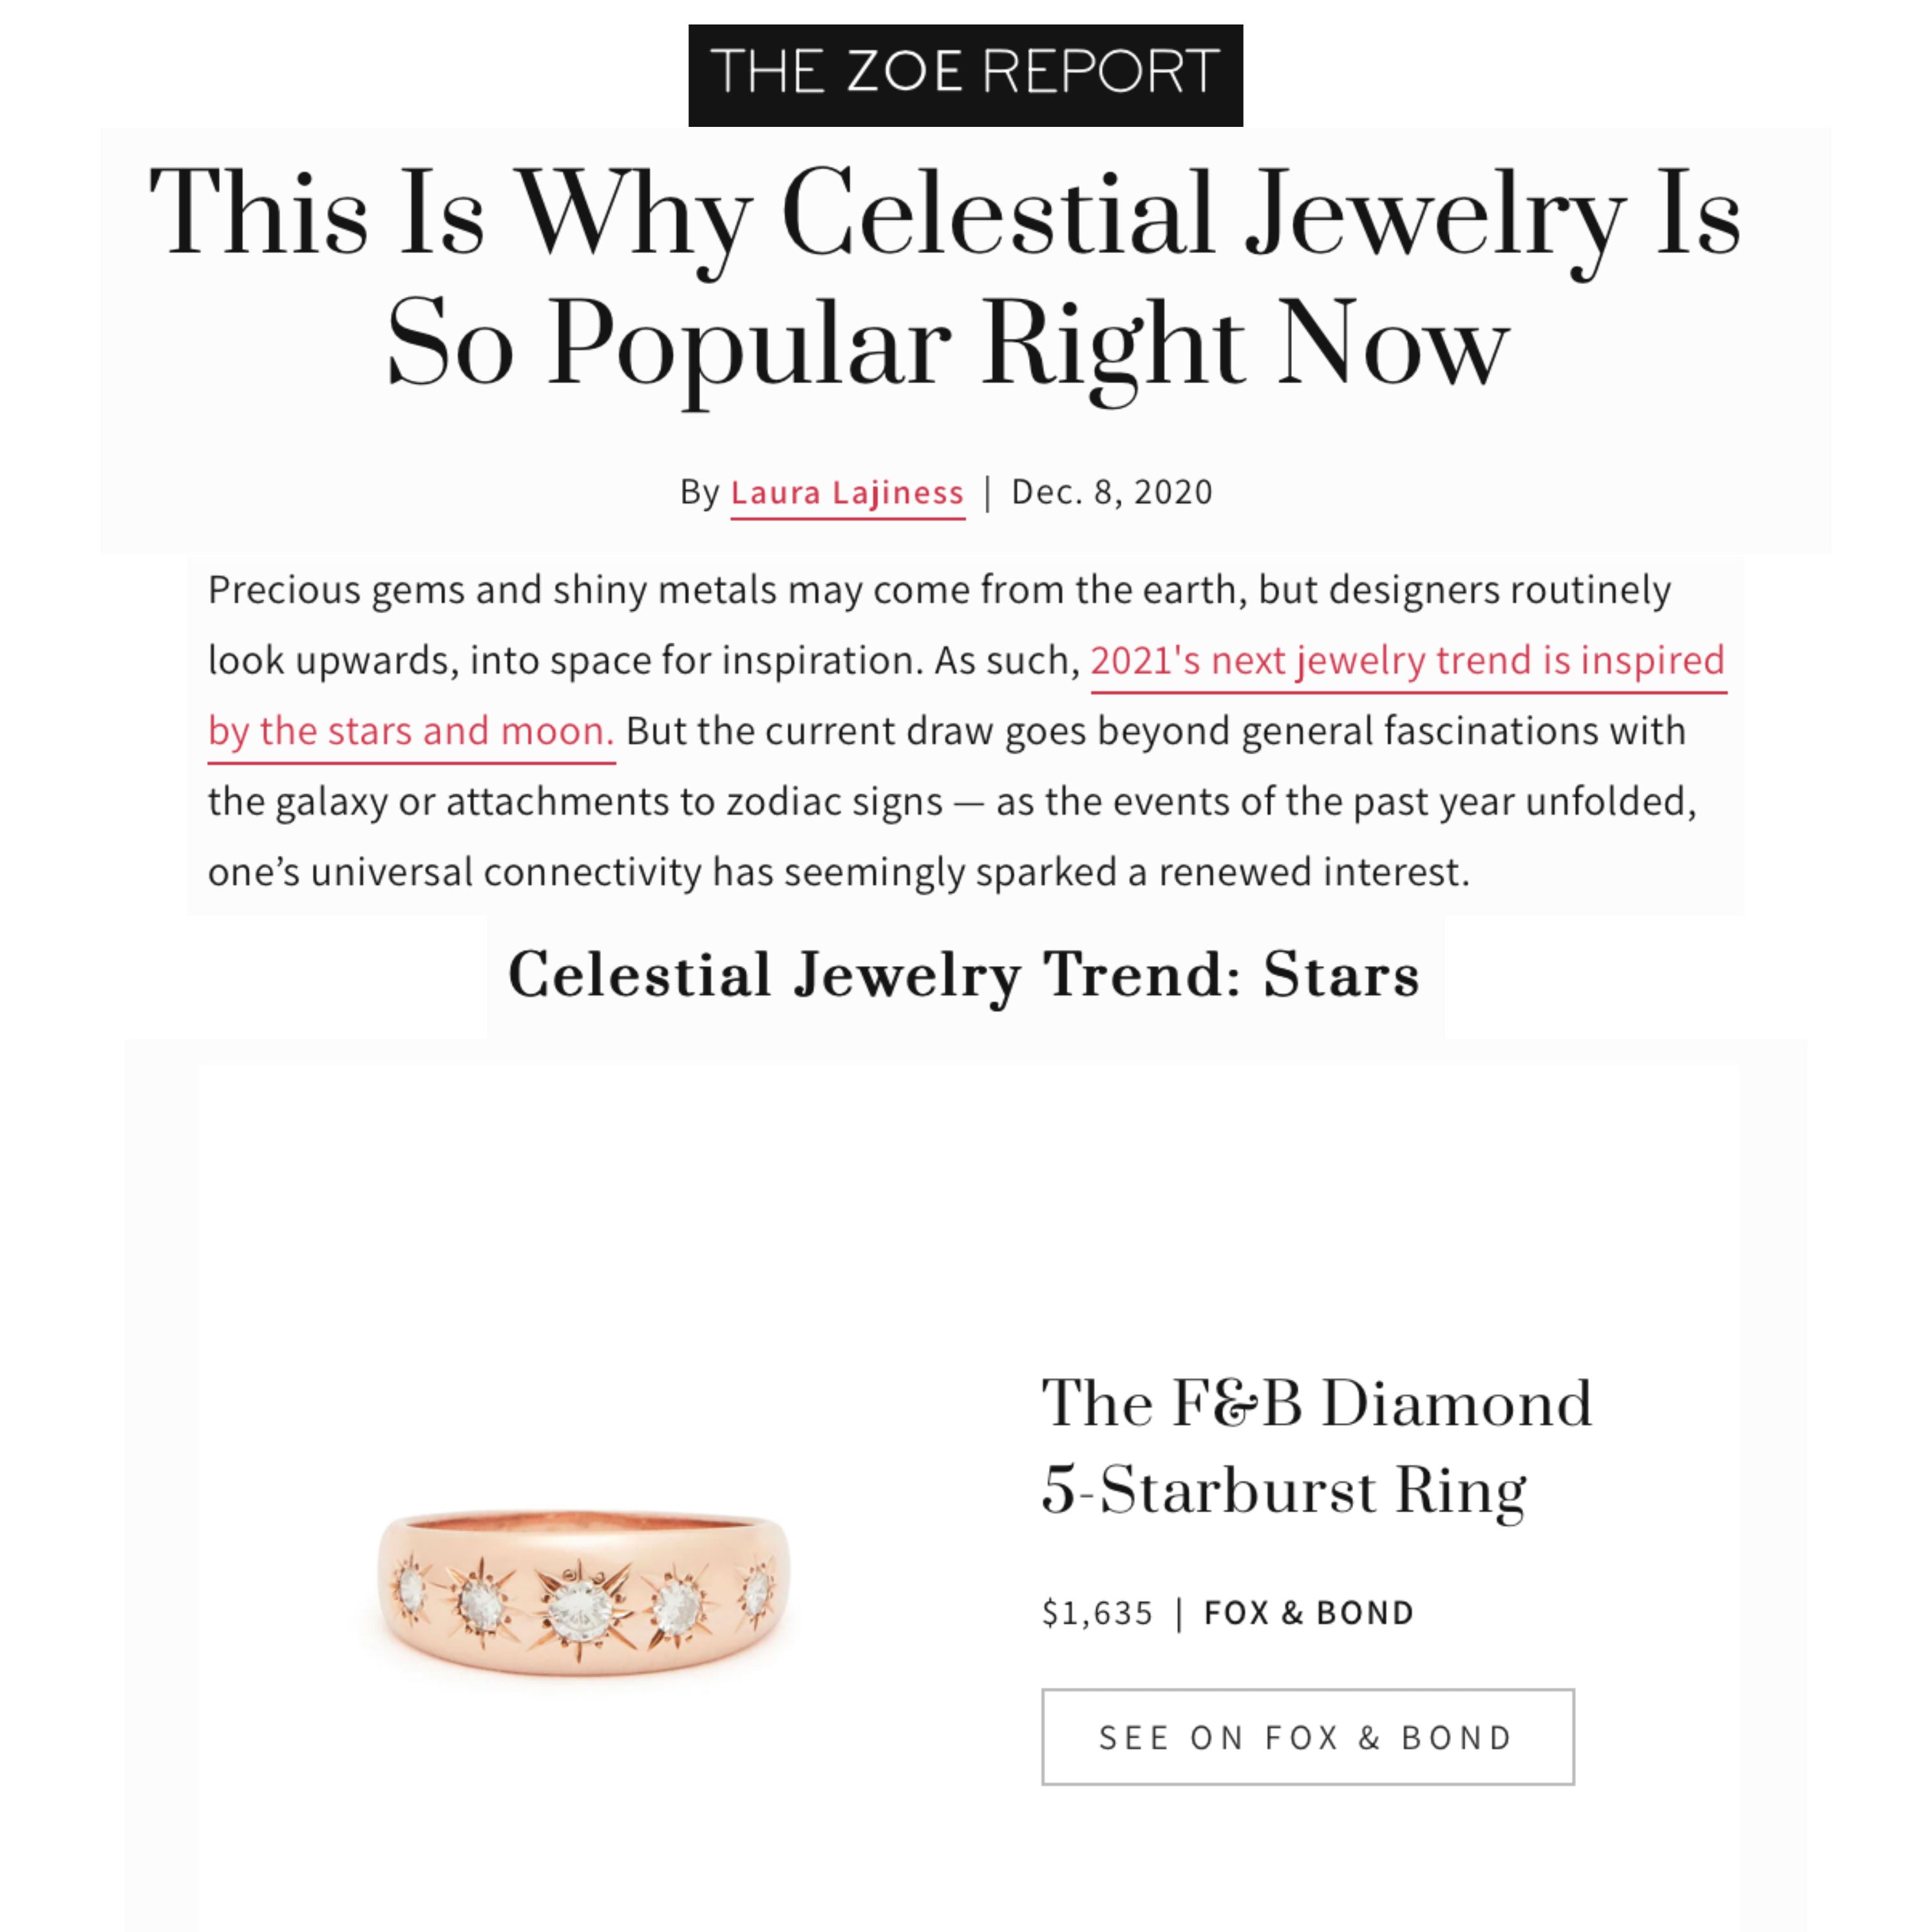 The Zoe Report: This Is Why Celestial Jewelry Is So Popular Right Now